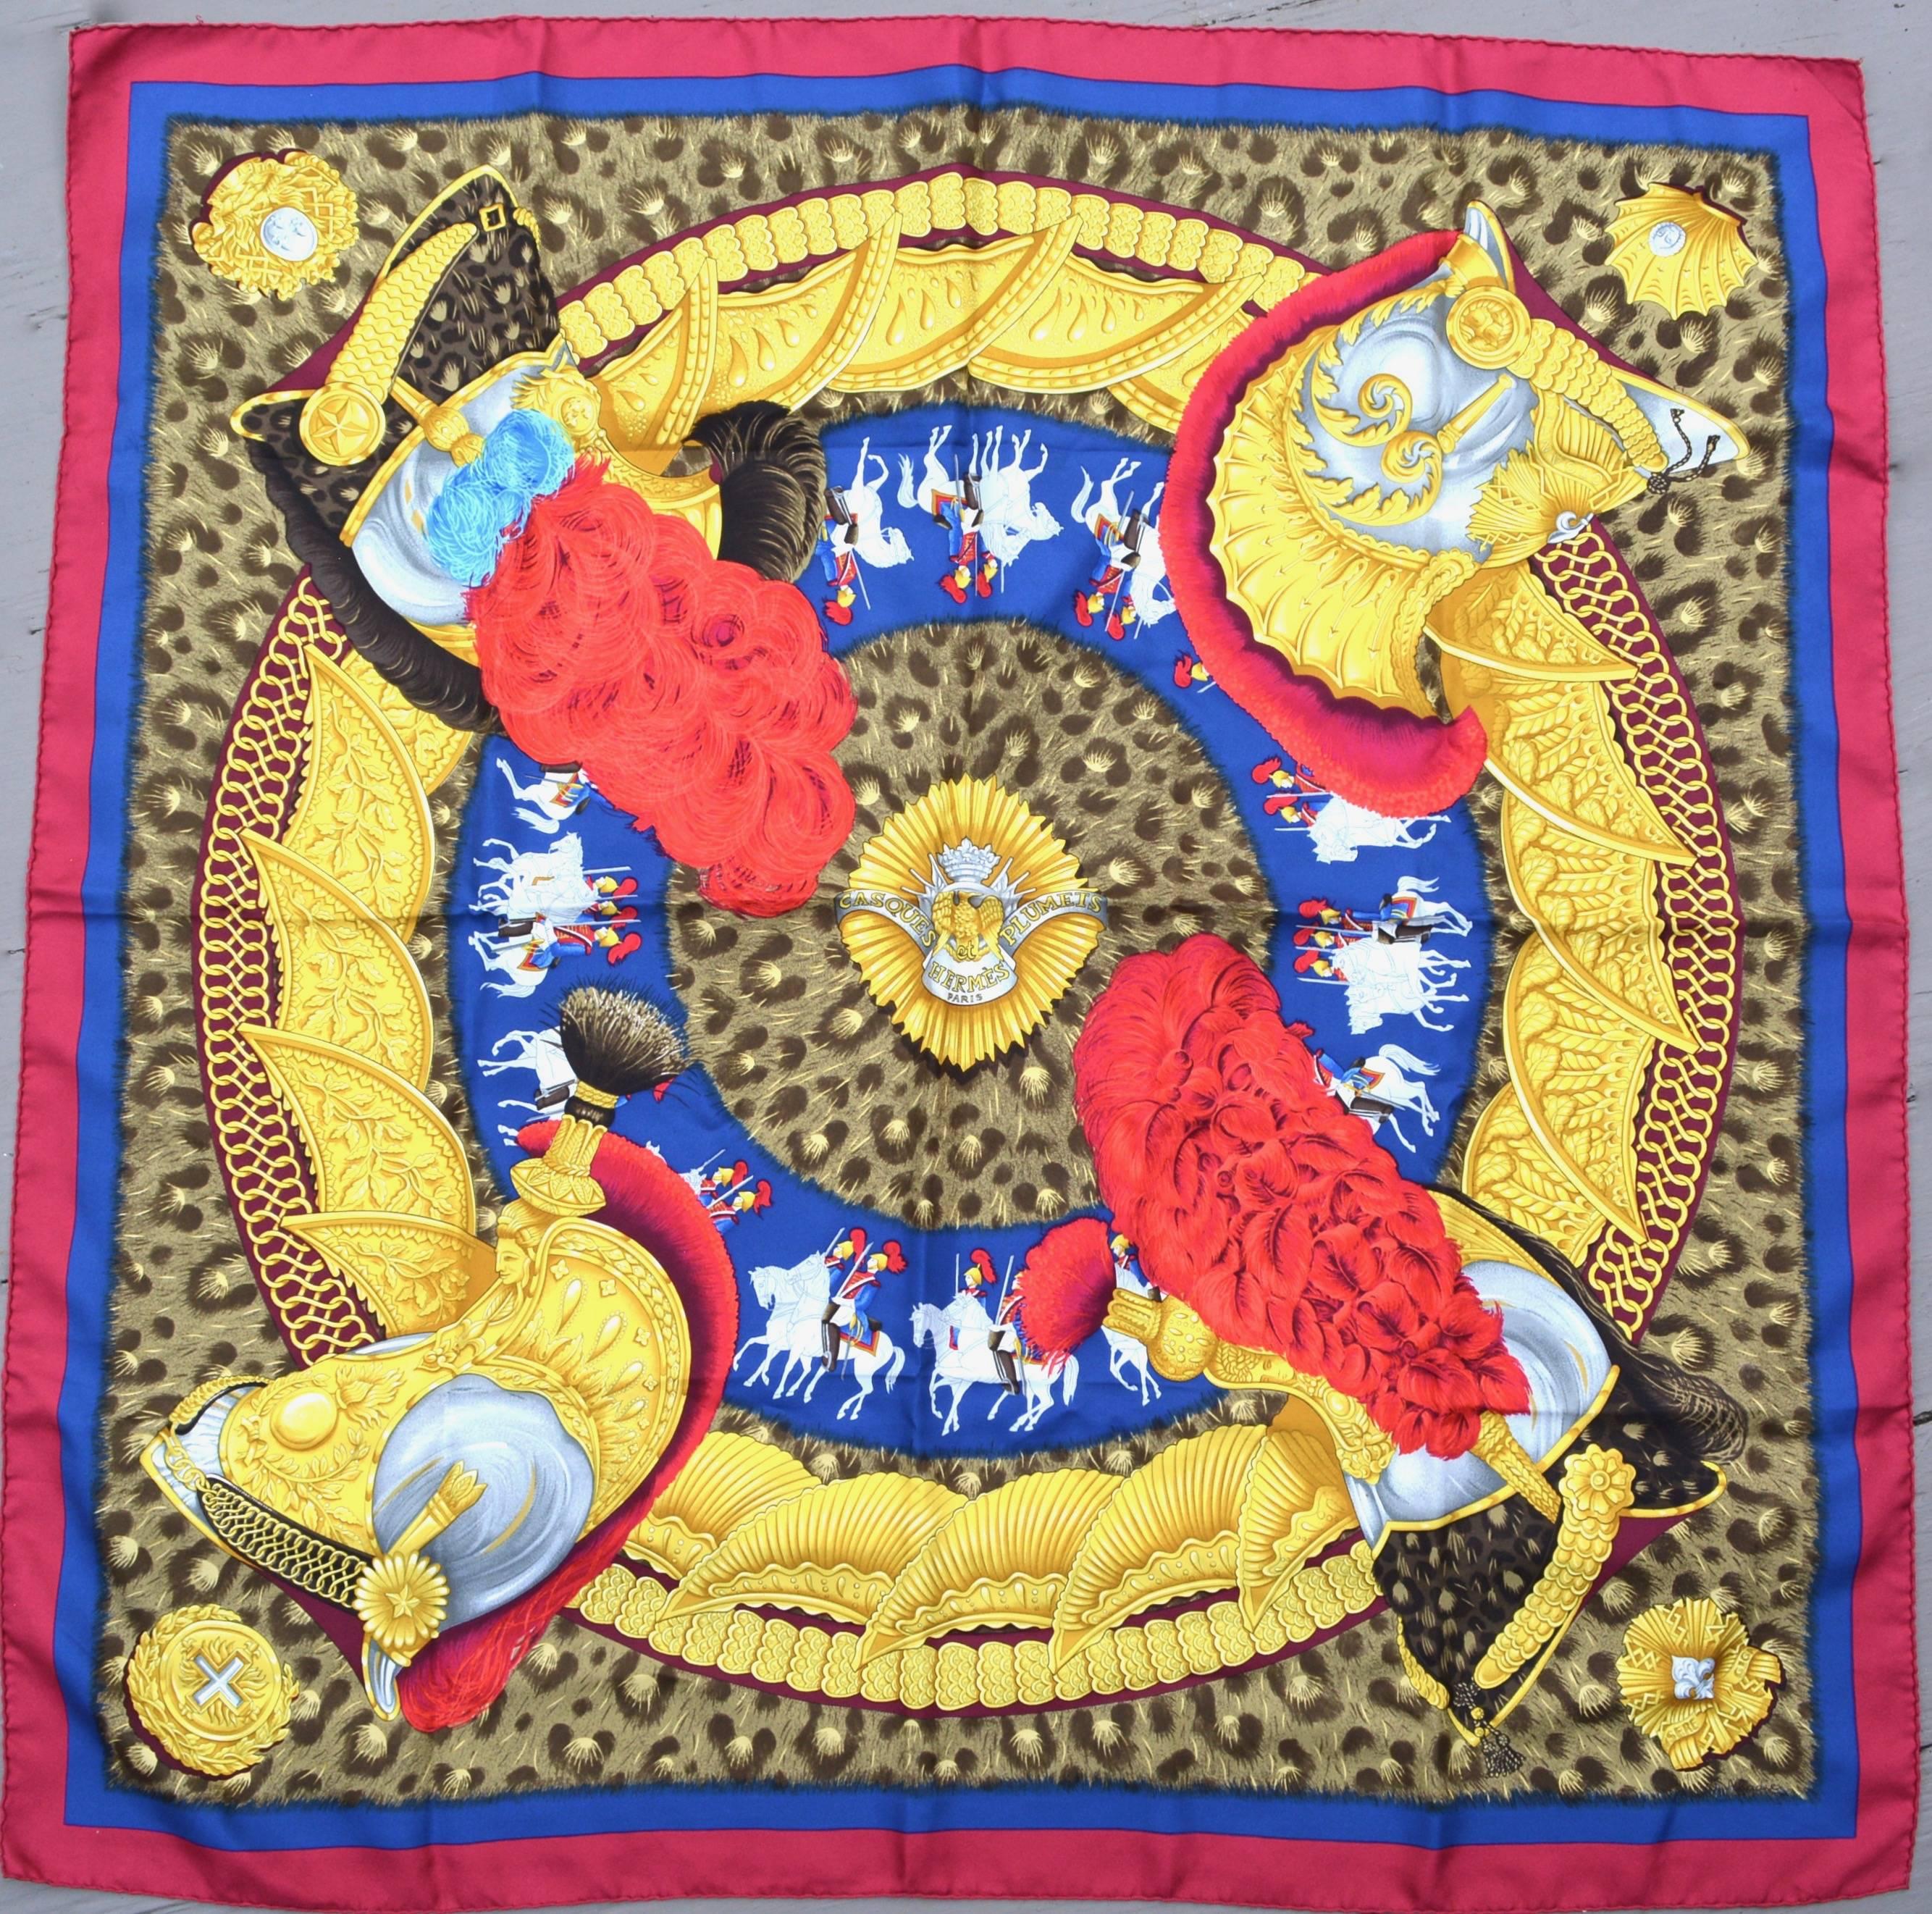 Gorgeous royal themed deep vibrant colored Casques Plumies silk scarf. Original silk screen design c1989 by Julia Abadie. This is vintage.  Hand rolled edges. 35" X 35". Excellent. Rare piece. Arrived just in time for a royal wedding!